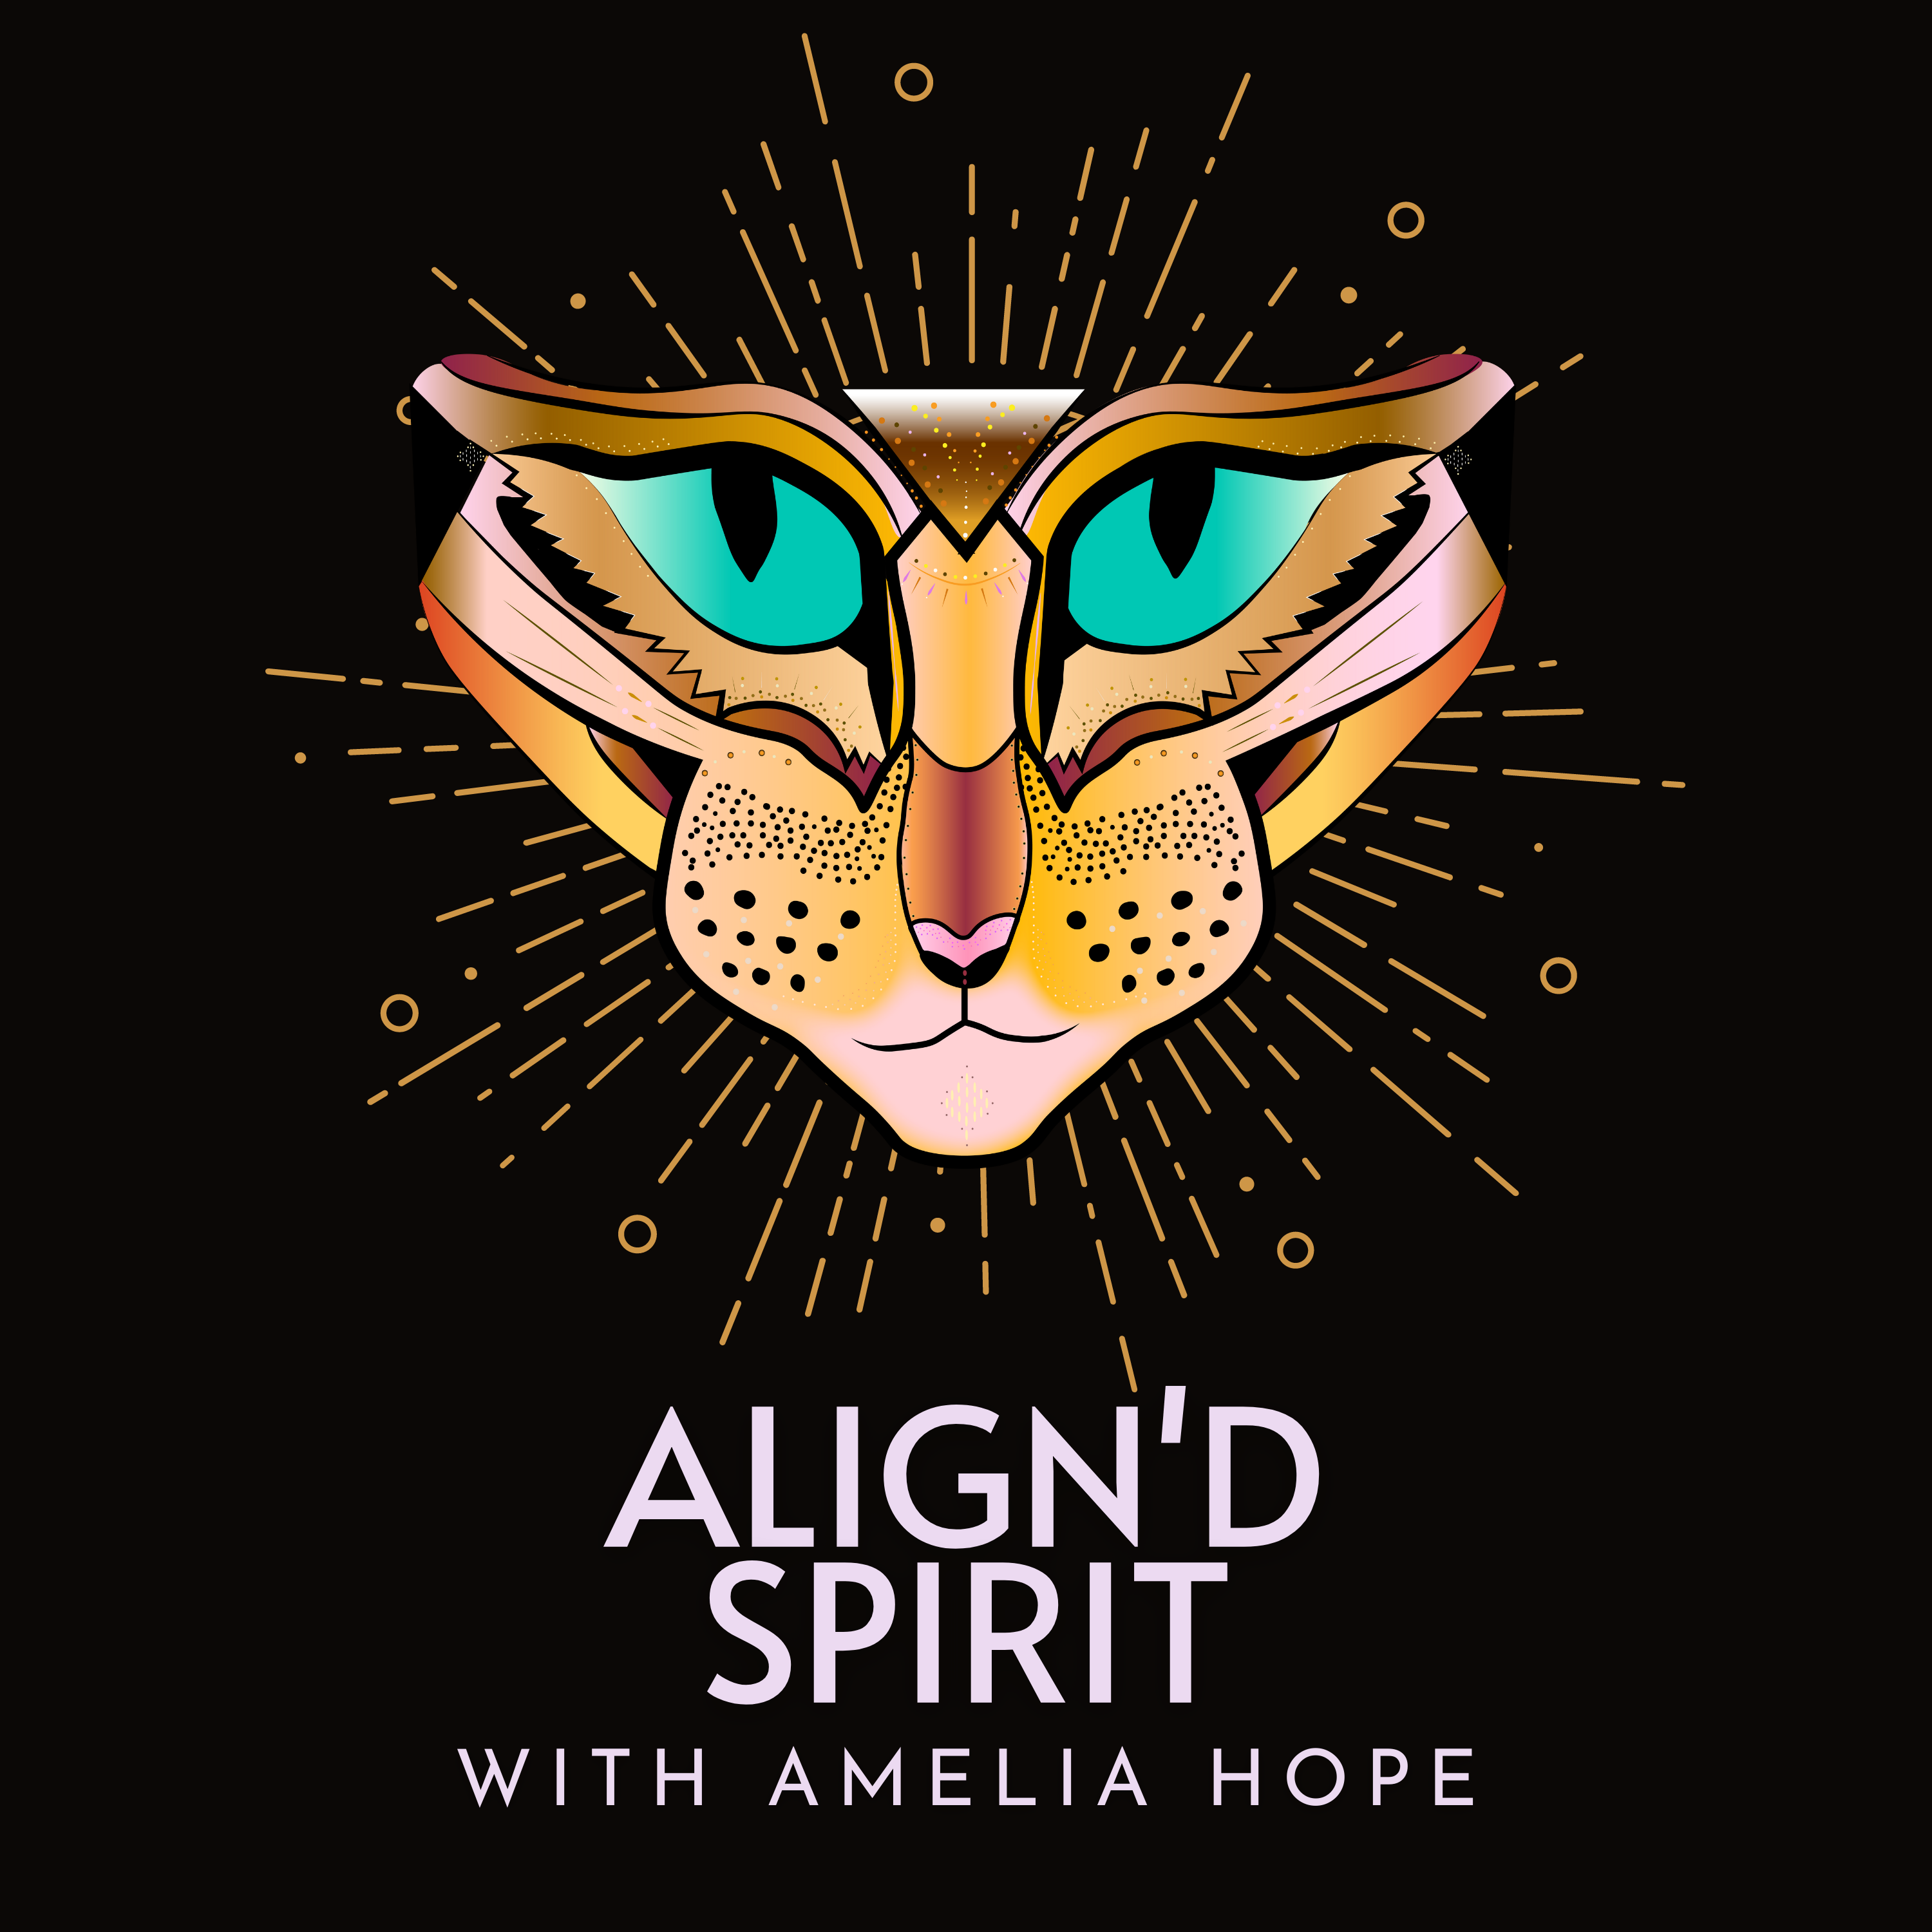 THE ALIGN'D SPIRIT with Amelia Hope